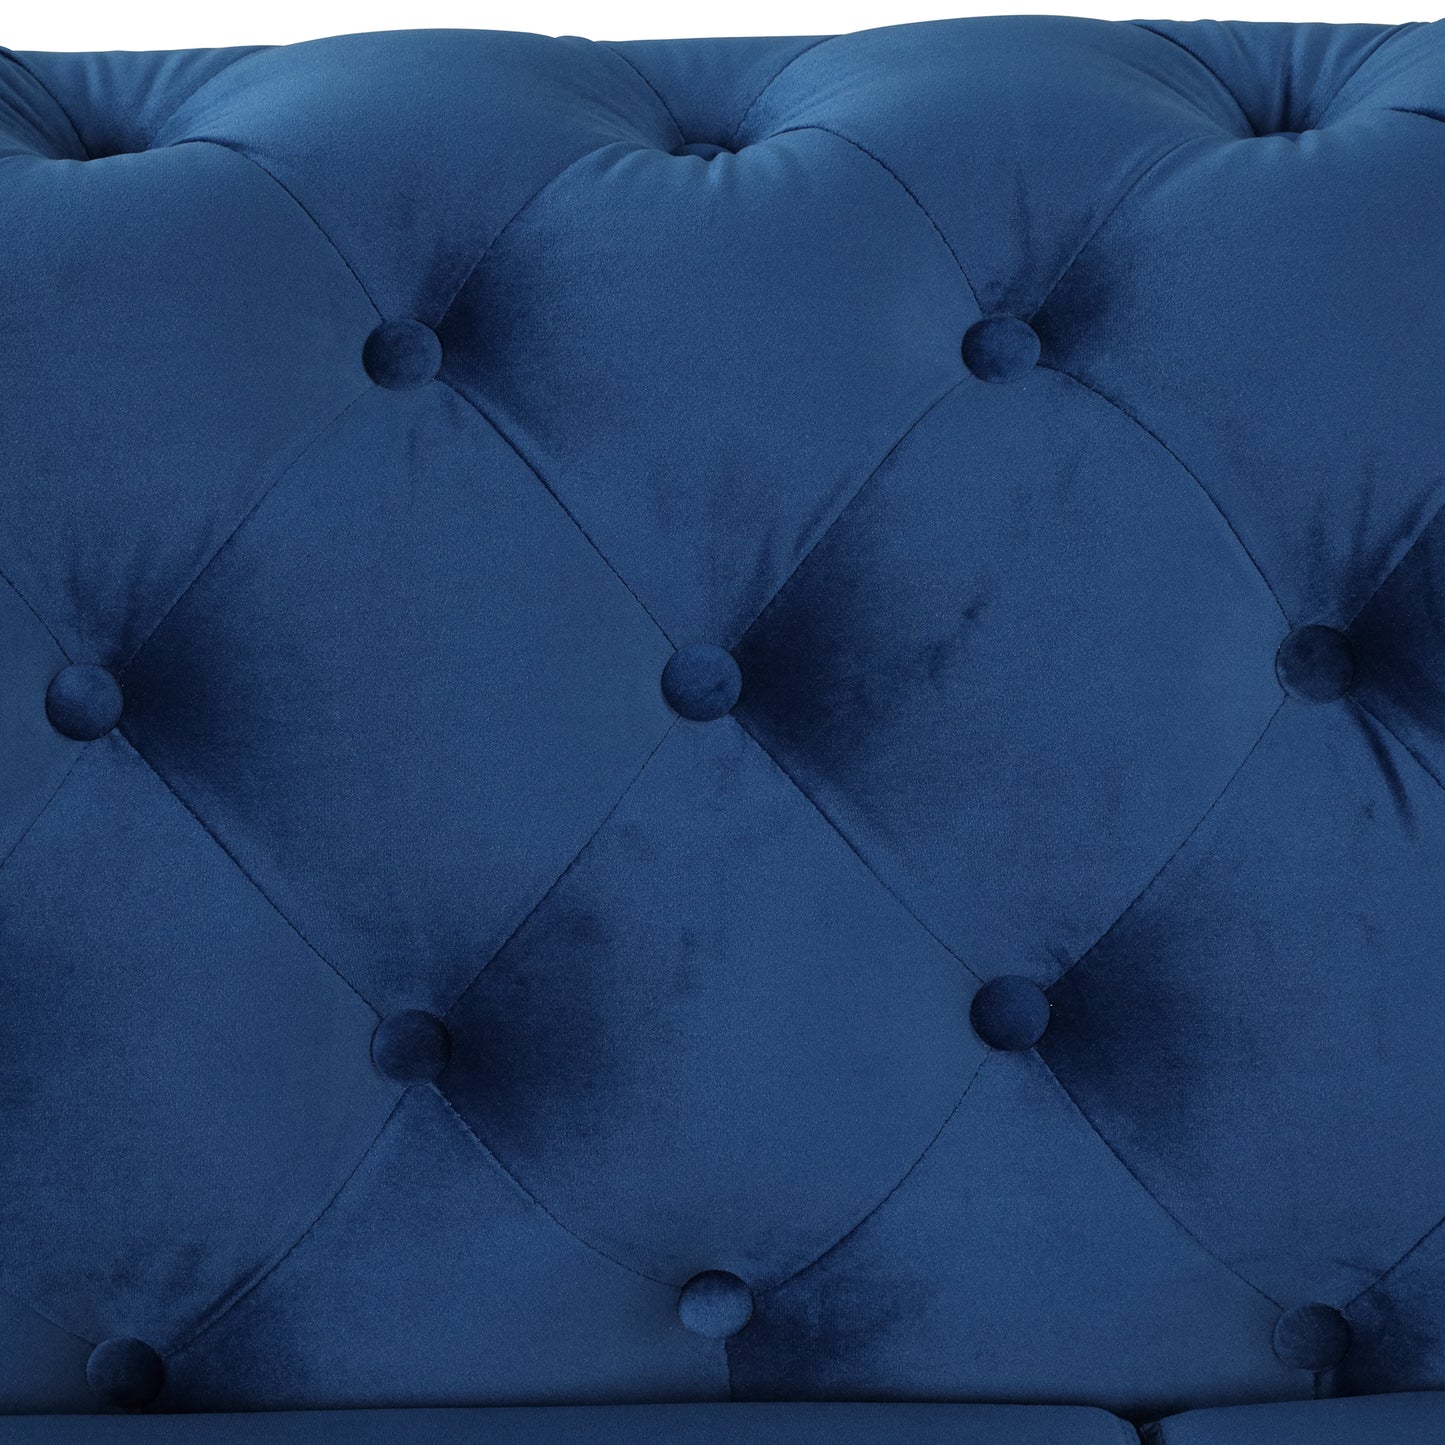 Velvet Upholstered Accent Chair with Button Tufted Back, Ideal for Living Room, Bedroom, or Small Spaces - 40.5 Inch, Blue